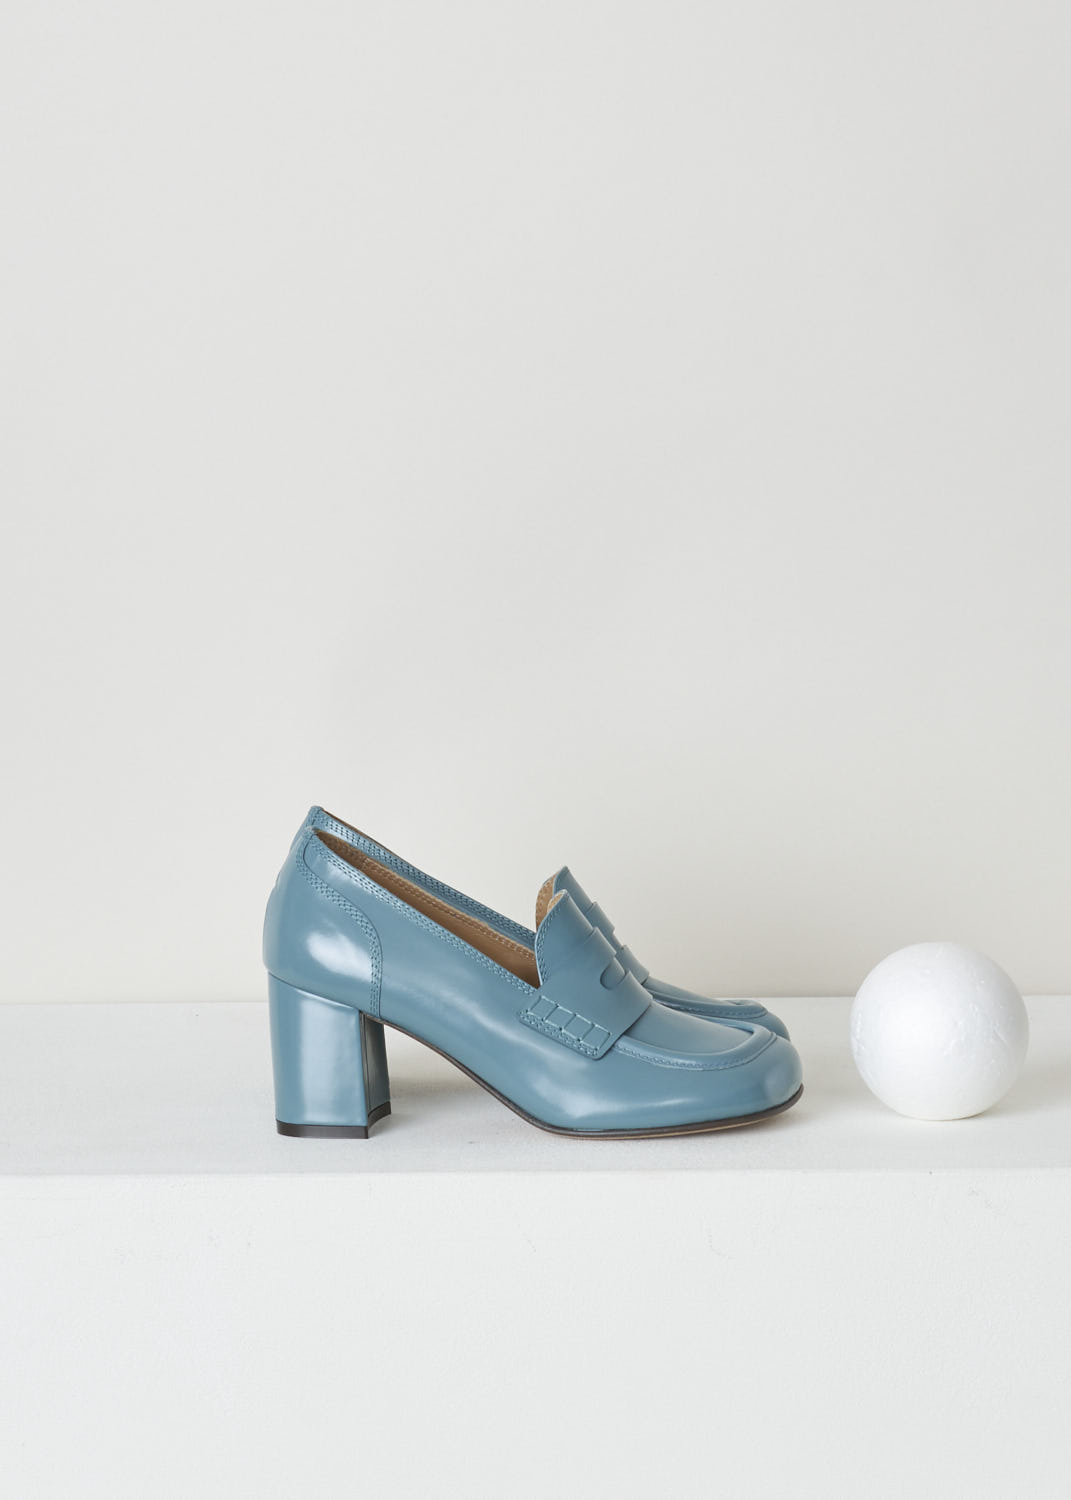 Heeled penny loafers in turquoise at Kiki's Stocksale